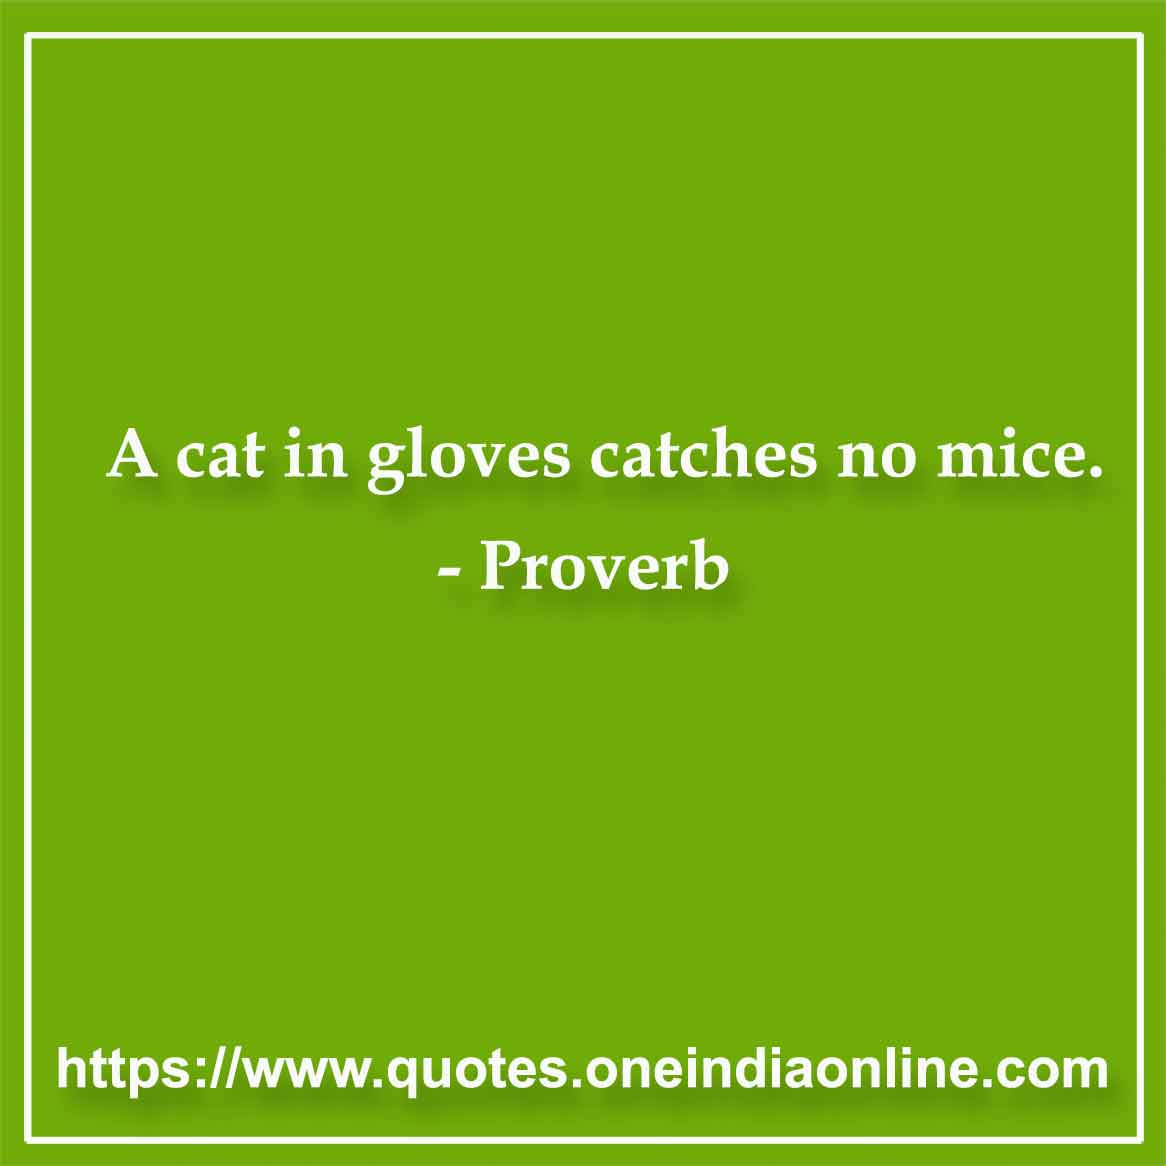 A cat in gloves catches no mice.

- 